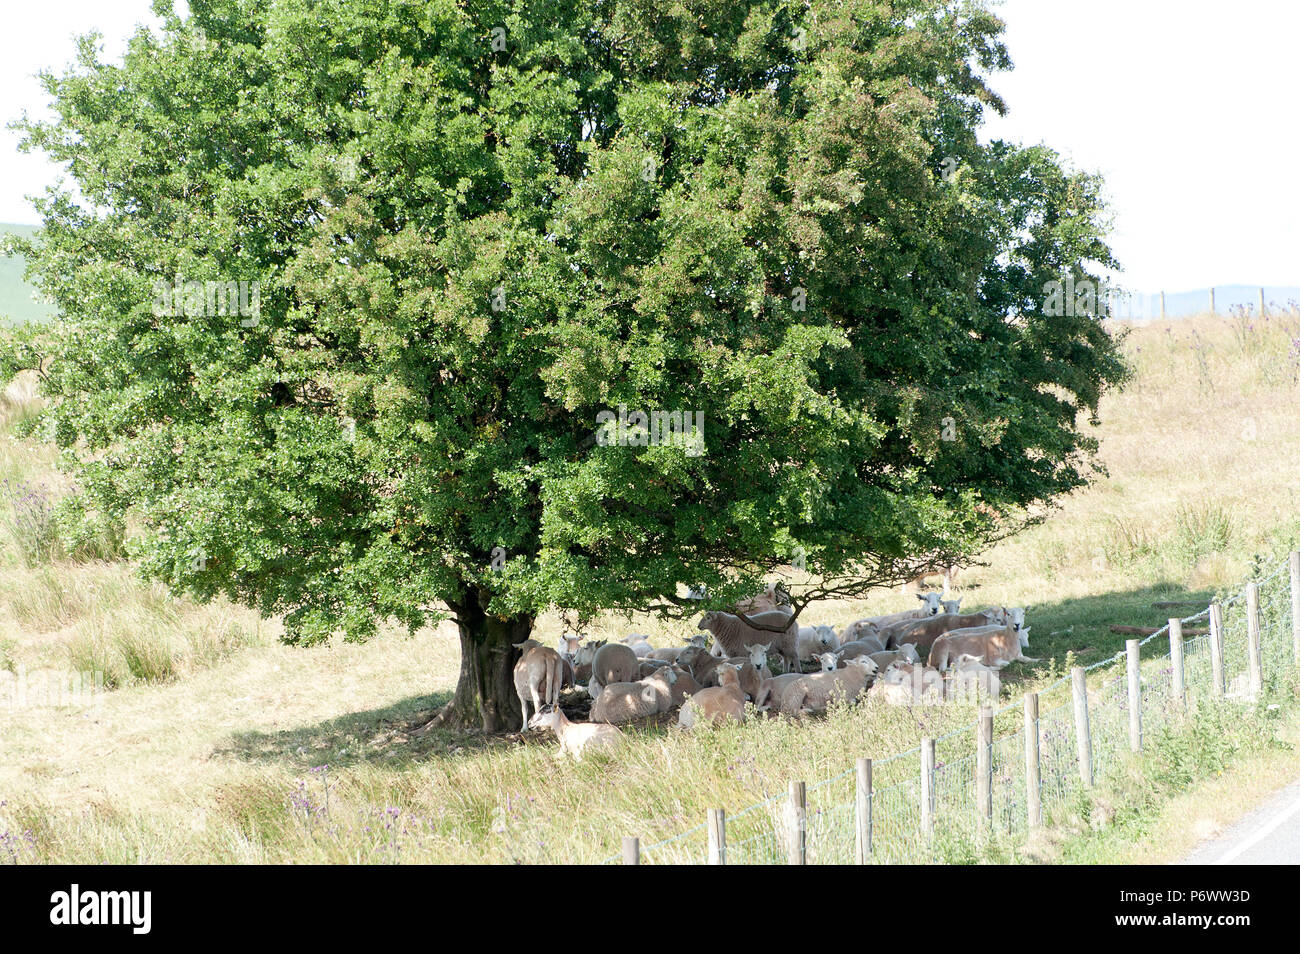 Builth Wells, Powys, UK. 3rd July 2018. Ewes find some refuge from the sun in the shade of a solitary tree on the Mynyd Epynt moorland. Sheep feel the heat, during the ongoing heatwave, near Builth Wells on the Mynyd Epynt moorland in Powys, Wales, UK. © Credit: Graham M. Lawrence/Alamy Live News. Stock Photo